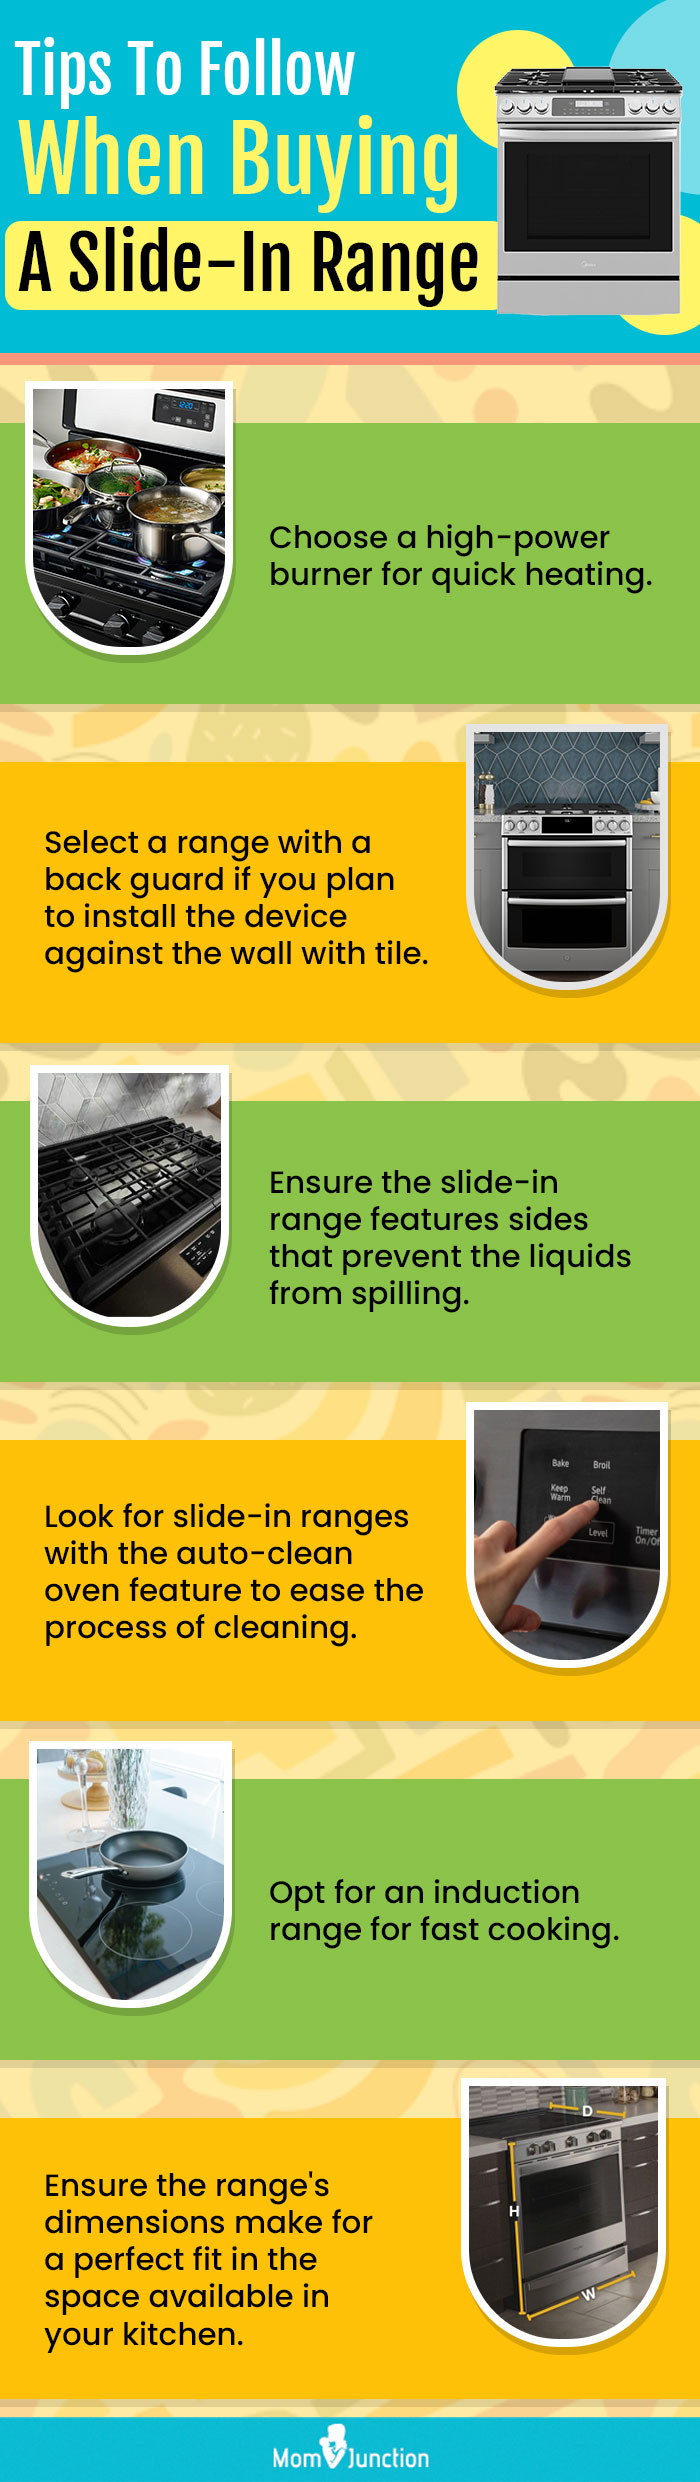 Tips To Follow When Buying A Slide In Range (Infographic)